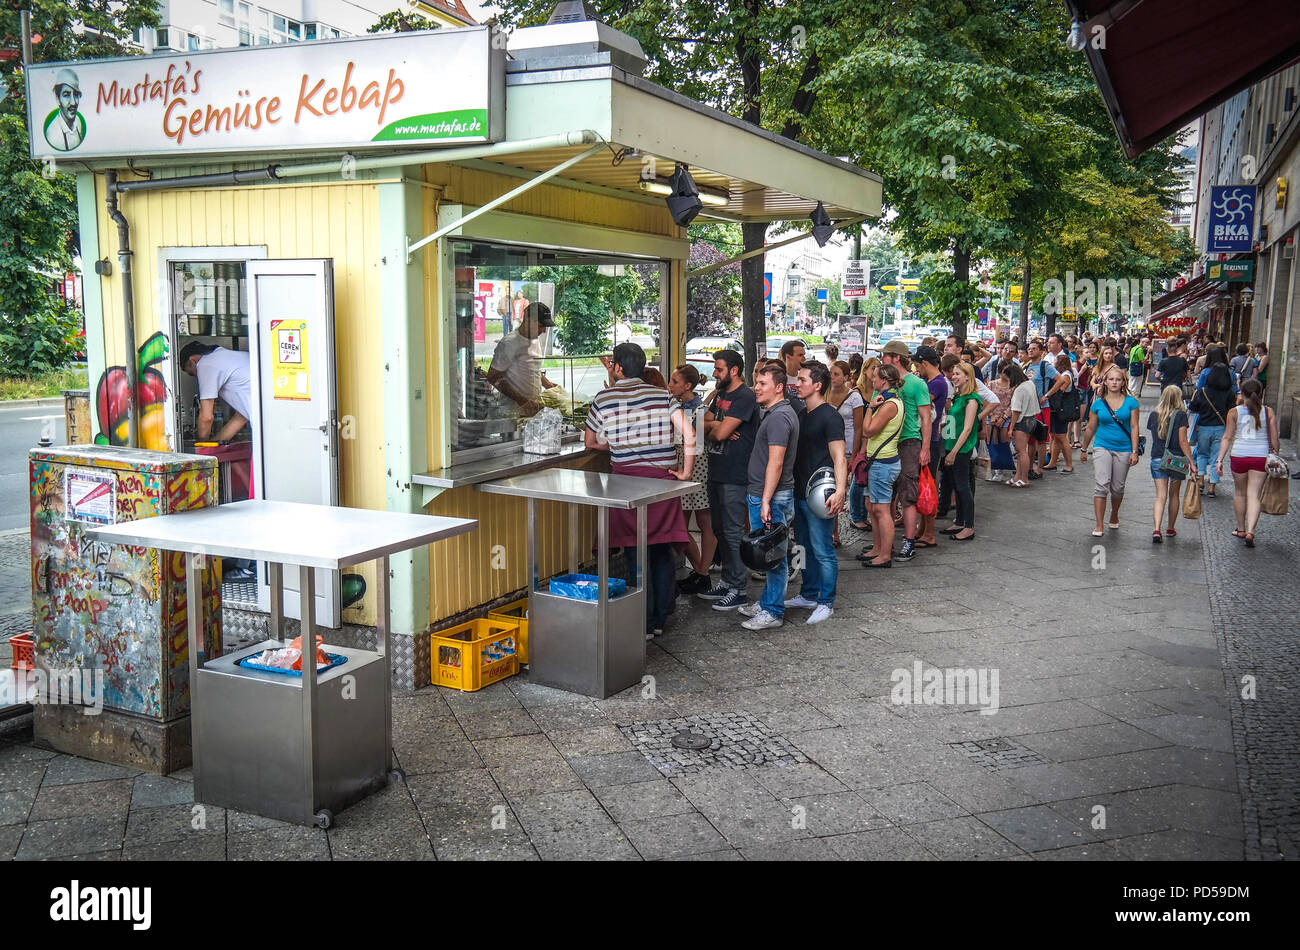 Mustafas gemüse kebab hi-res stock photography and images - Alamy